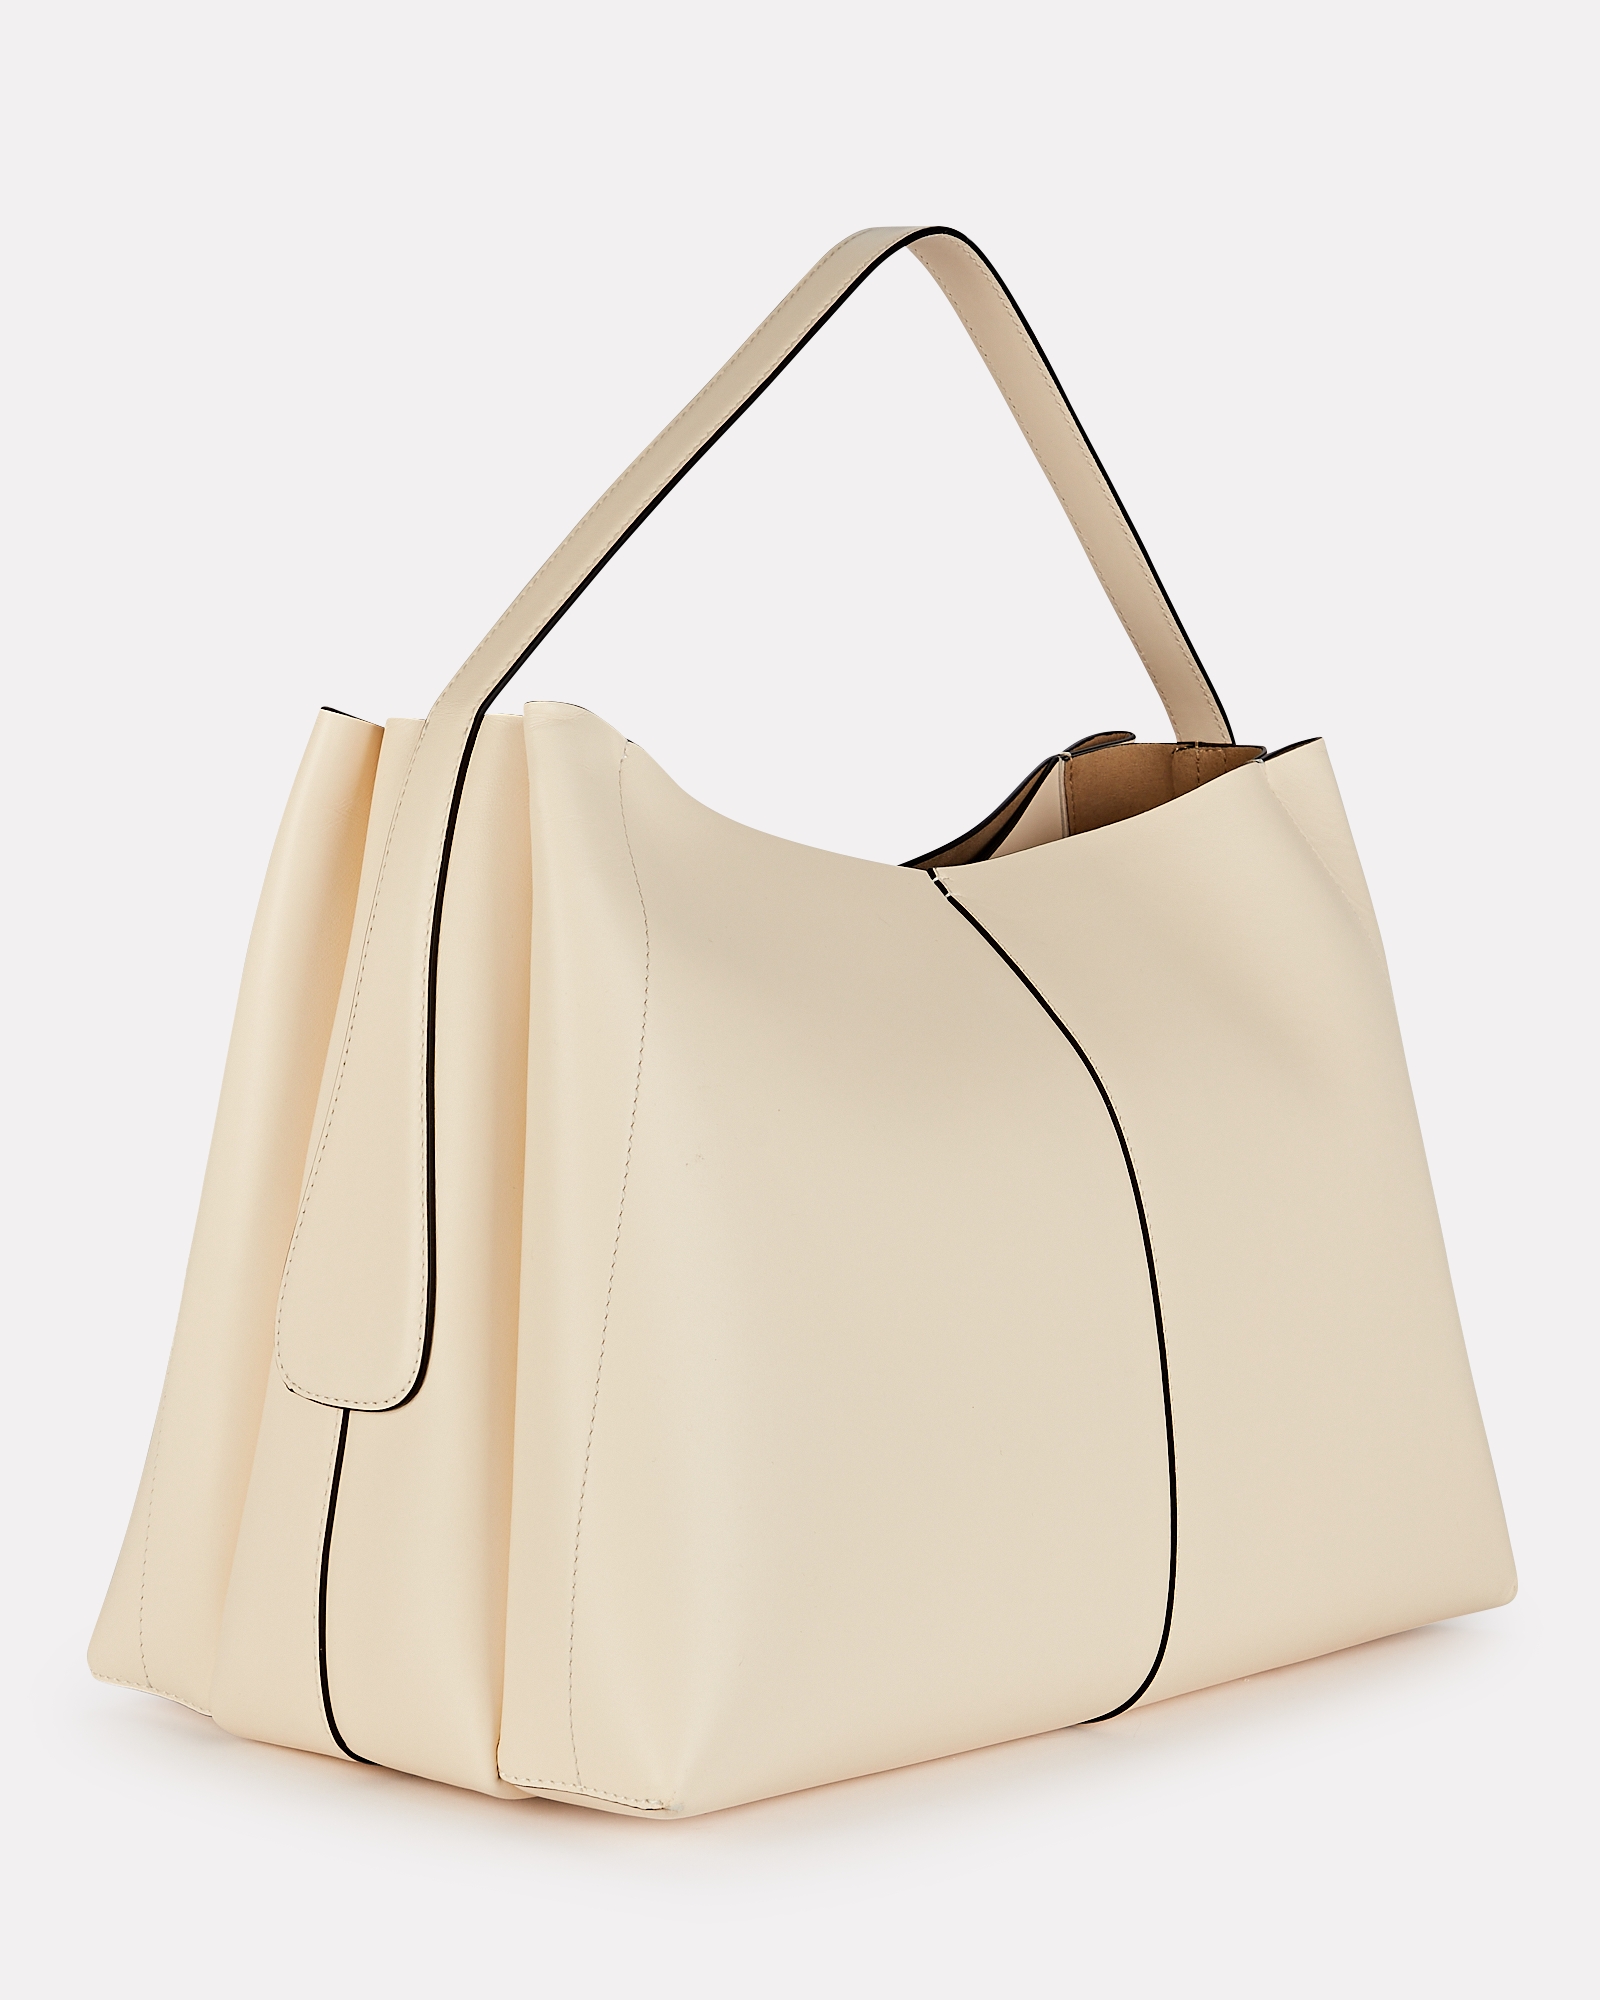 Ava Large Leather Tote Bag